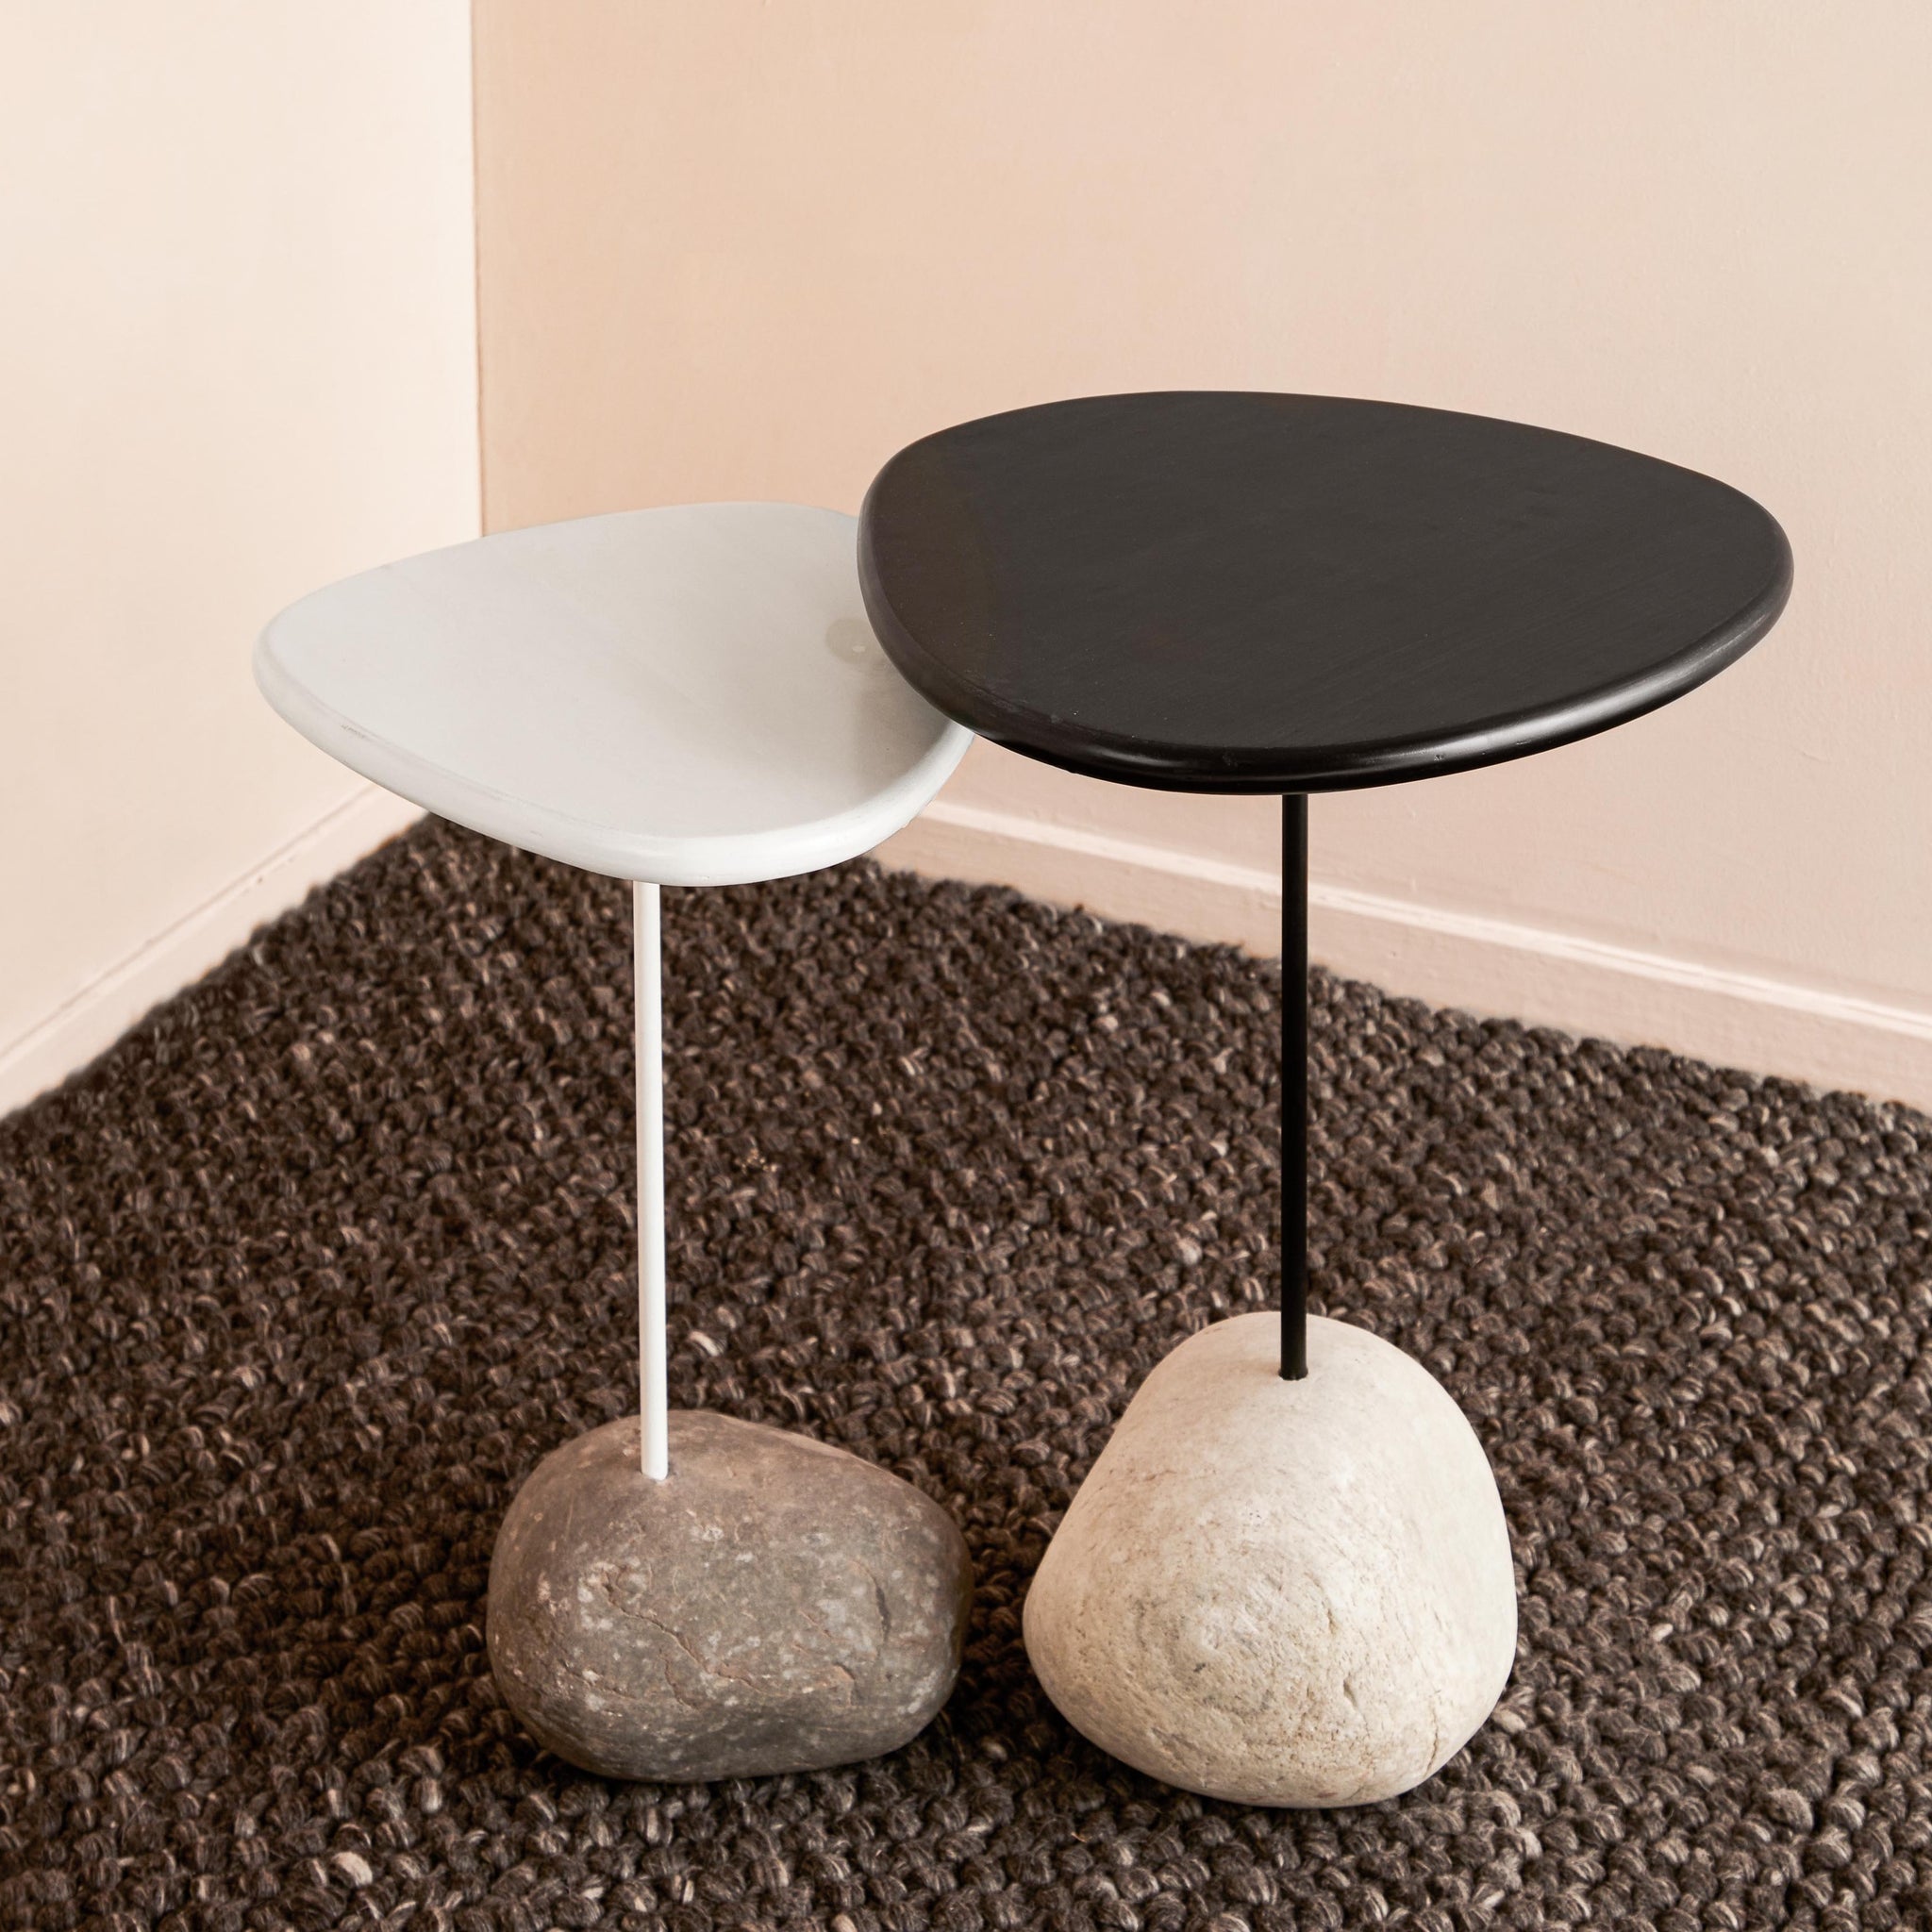 Pebble End Tables - Set of 2